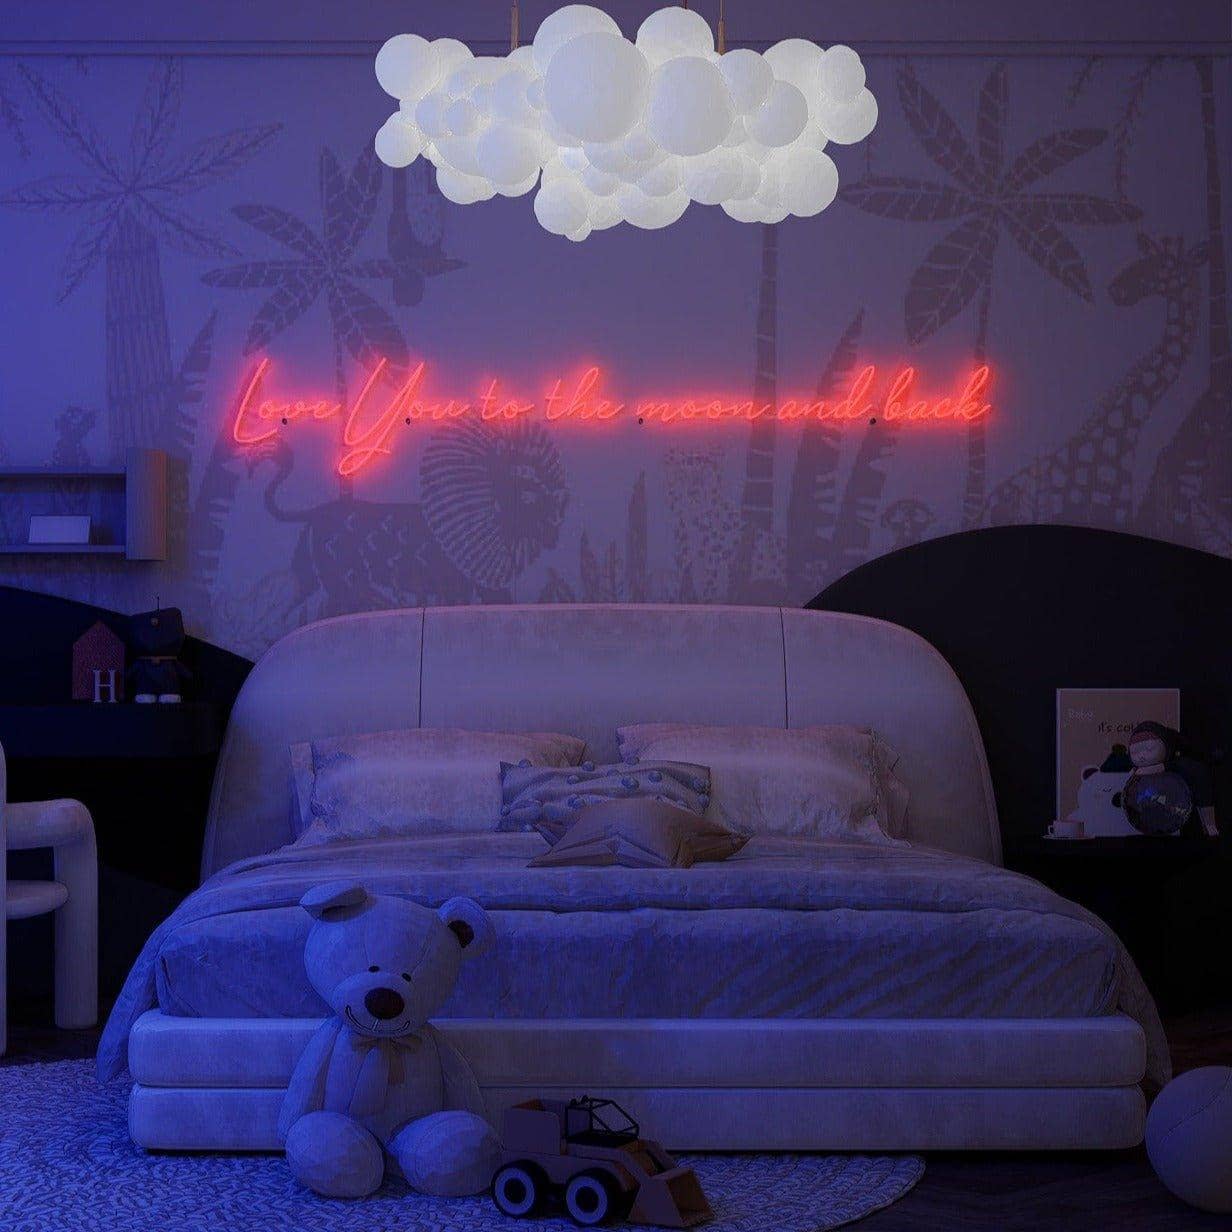 night-shot-of-lit-red-neon-lights-hanging-on-display-in-bedroom-love-you-to-the-moon-and-back